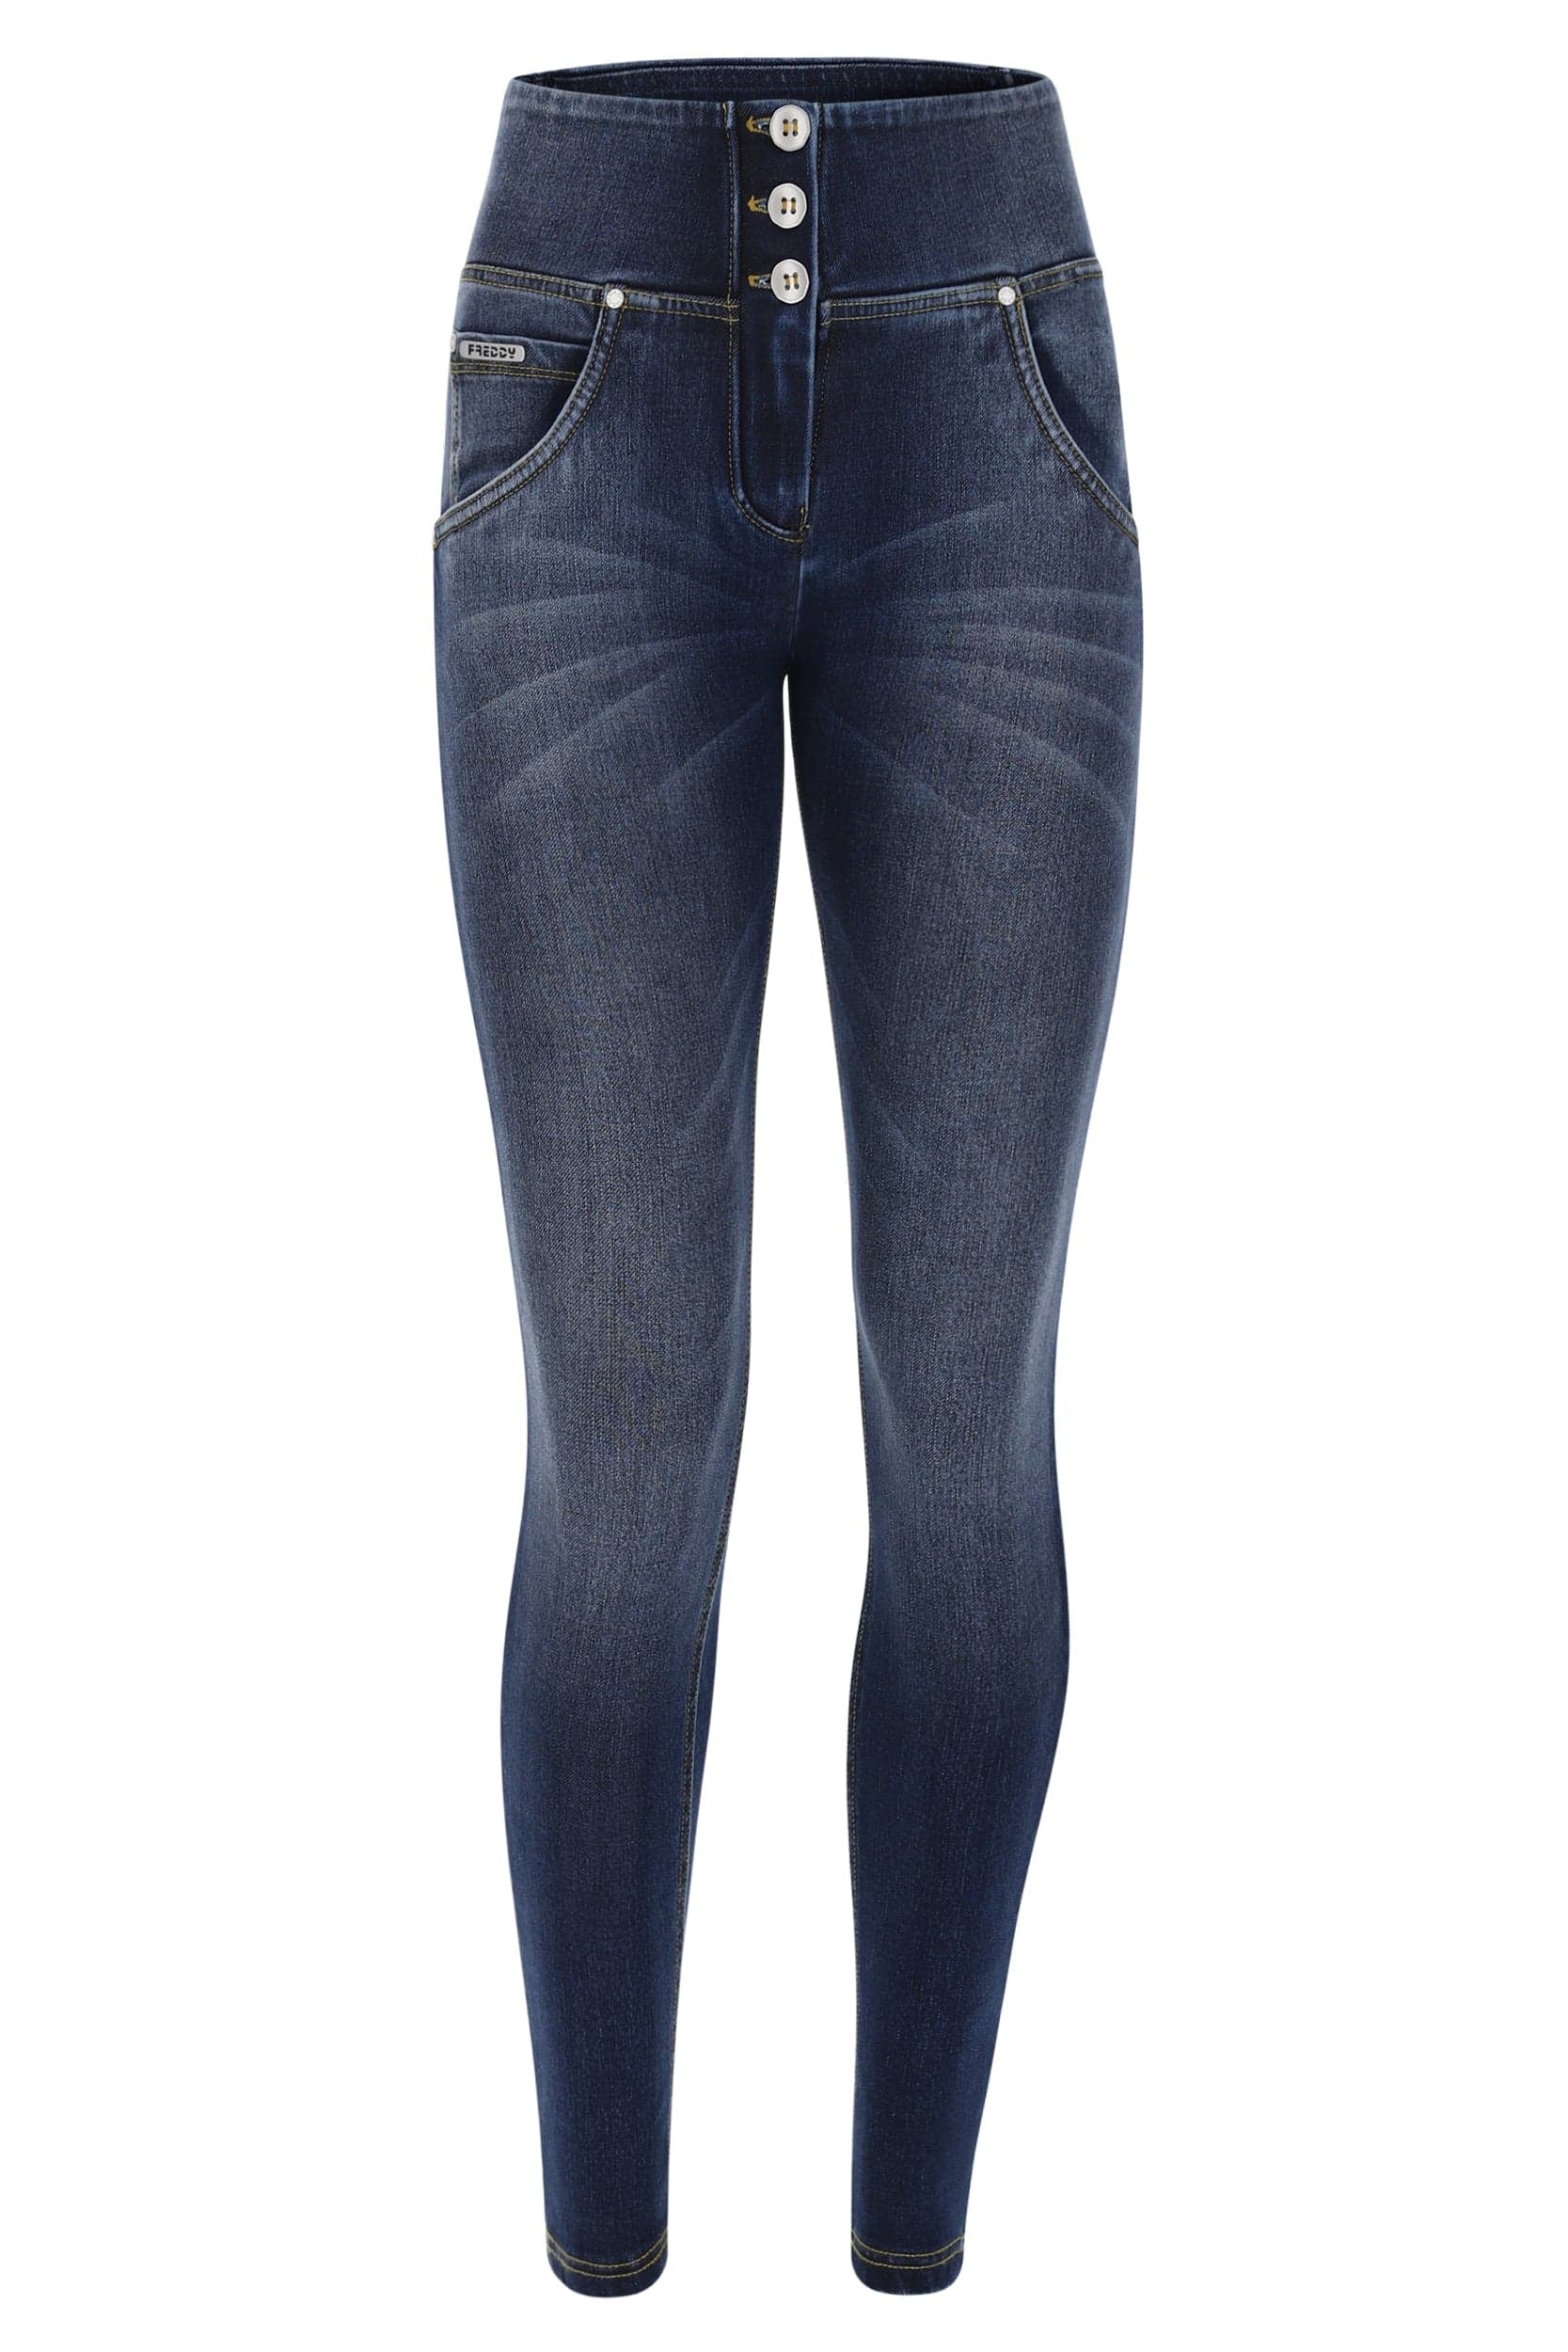 WR.UP® Snug Jeans - 3 Button Mid Waisted - Full Length - Dark Blue + Yellow Sitching 1